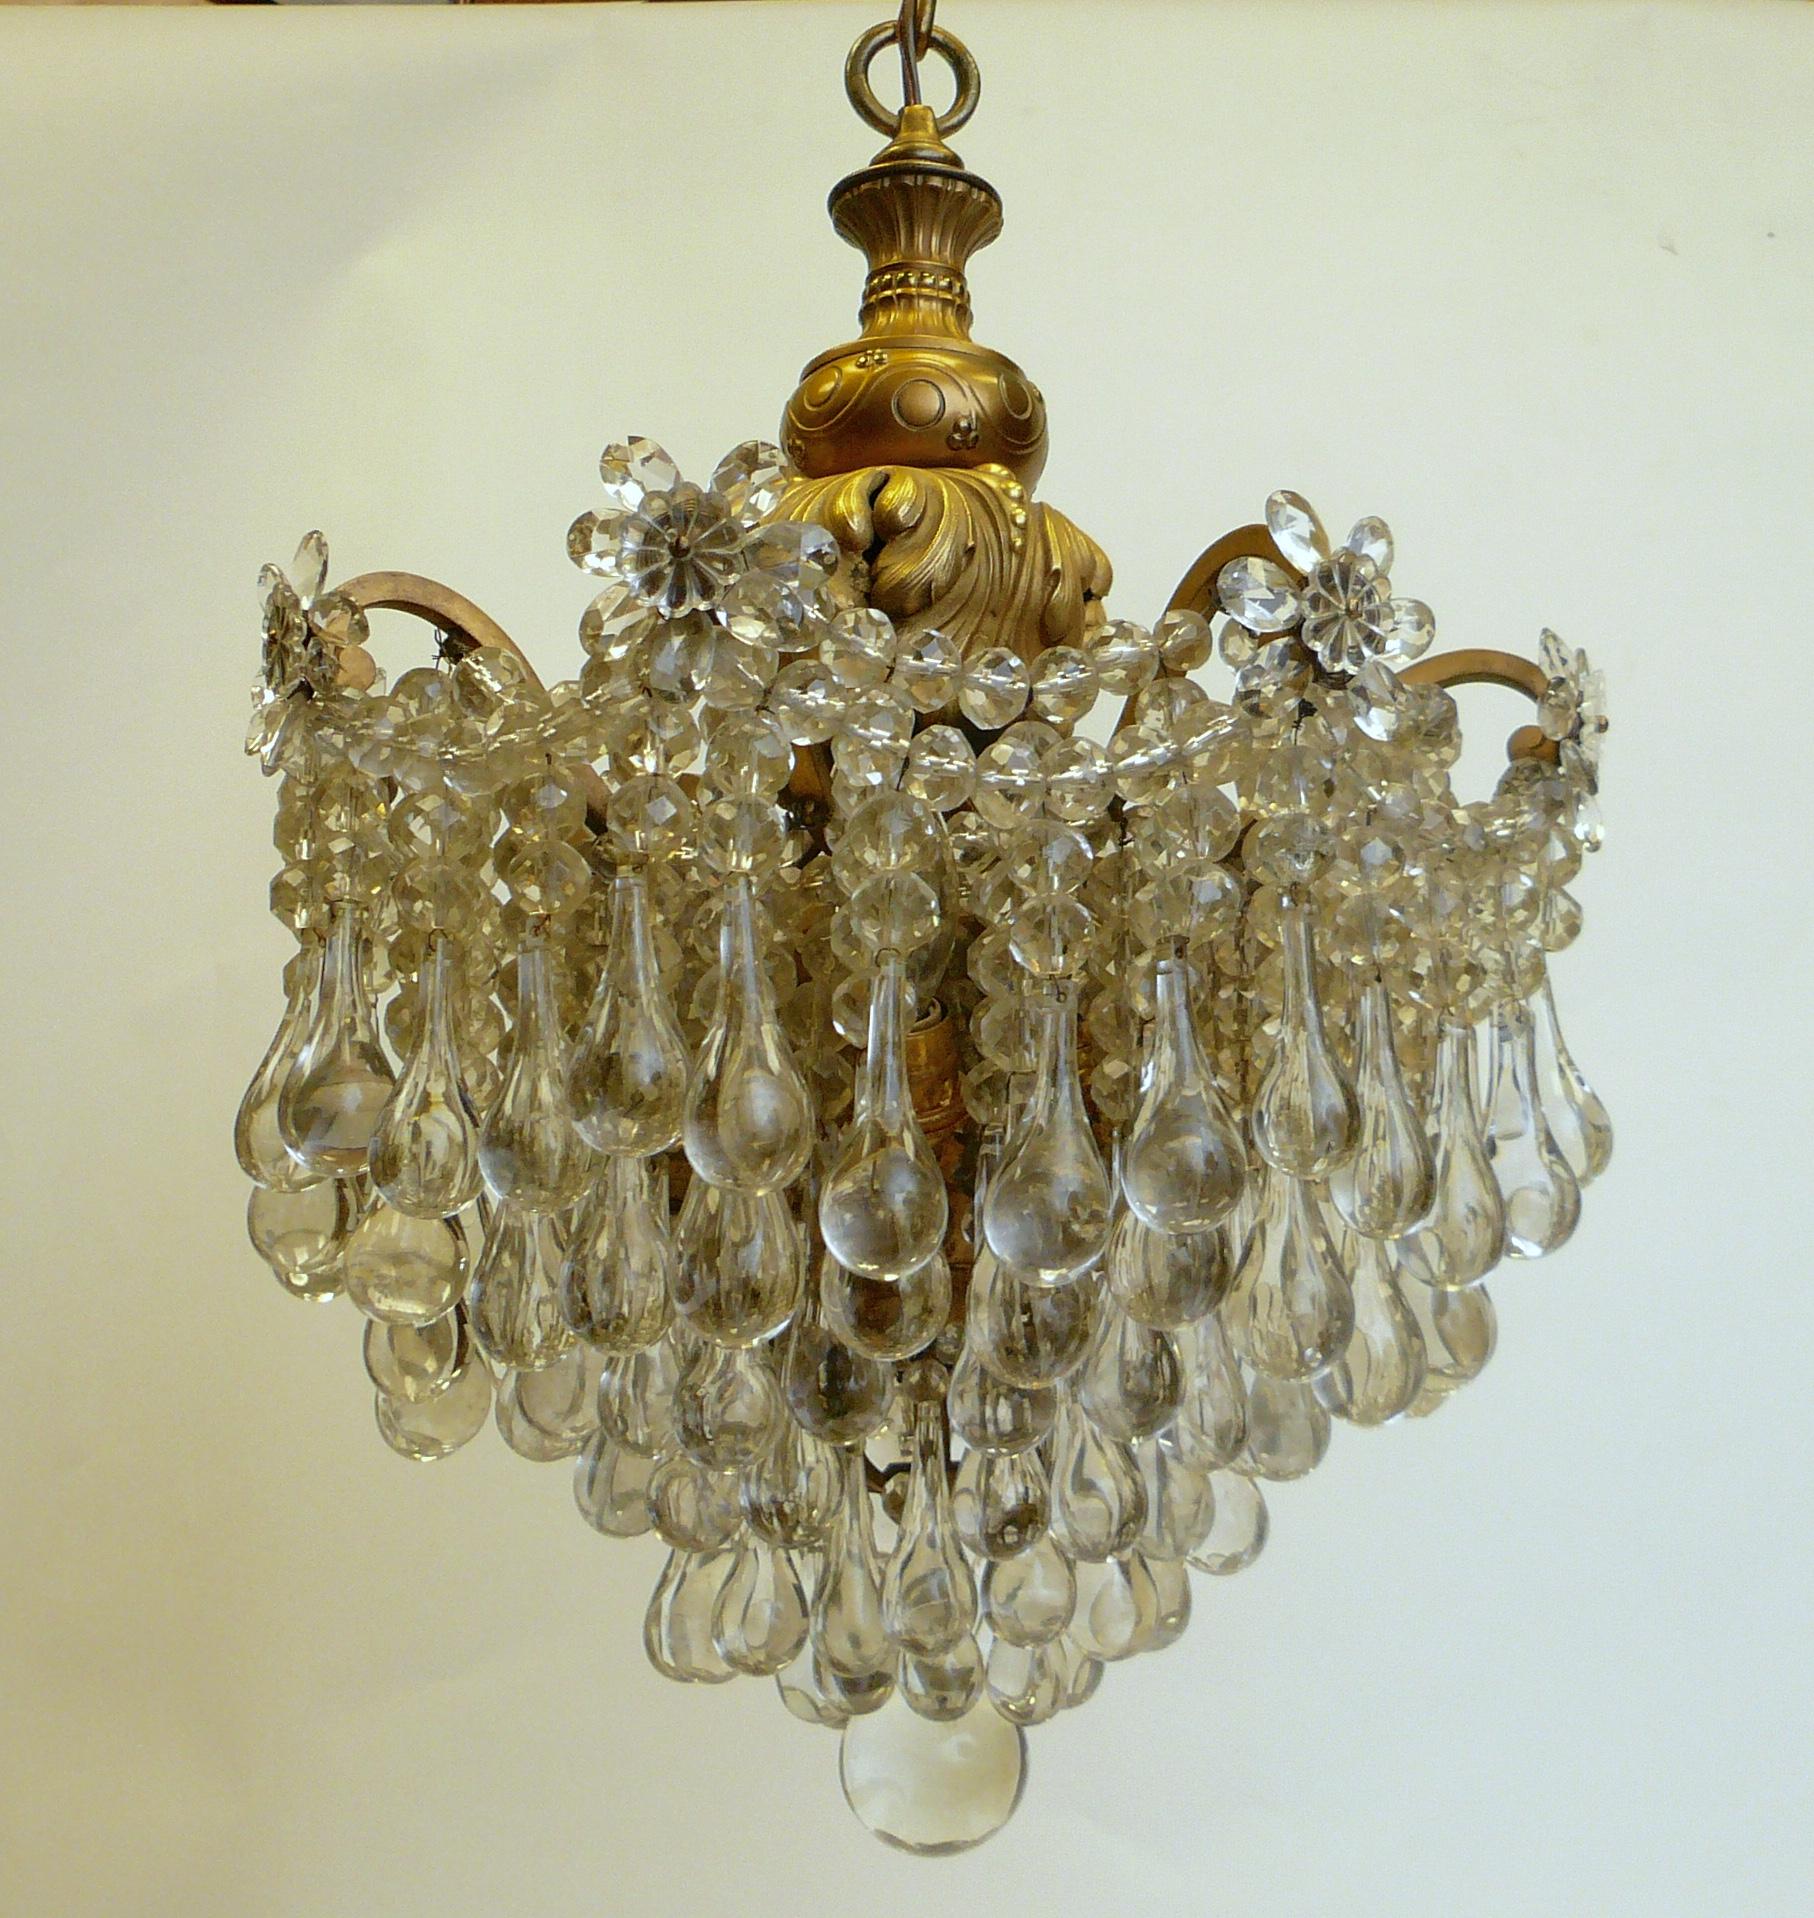 Belle Époque Gilt Bronze and Crystal Pendant Chandelier by E. F. Caldwell